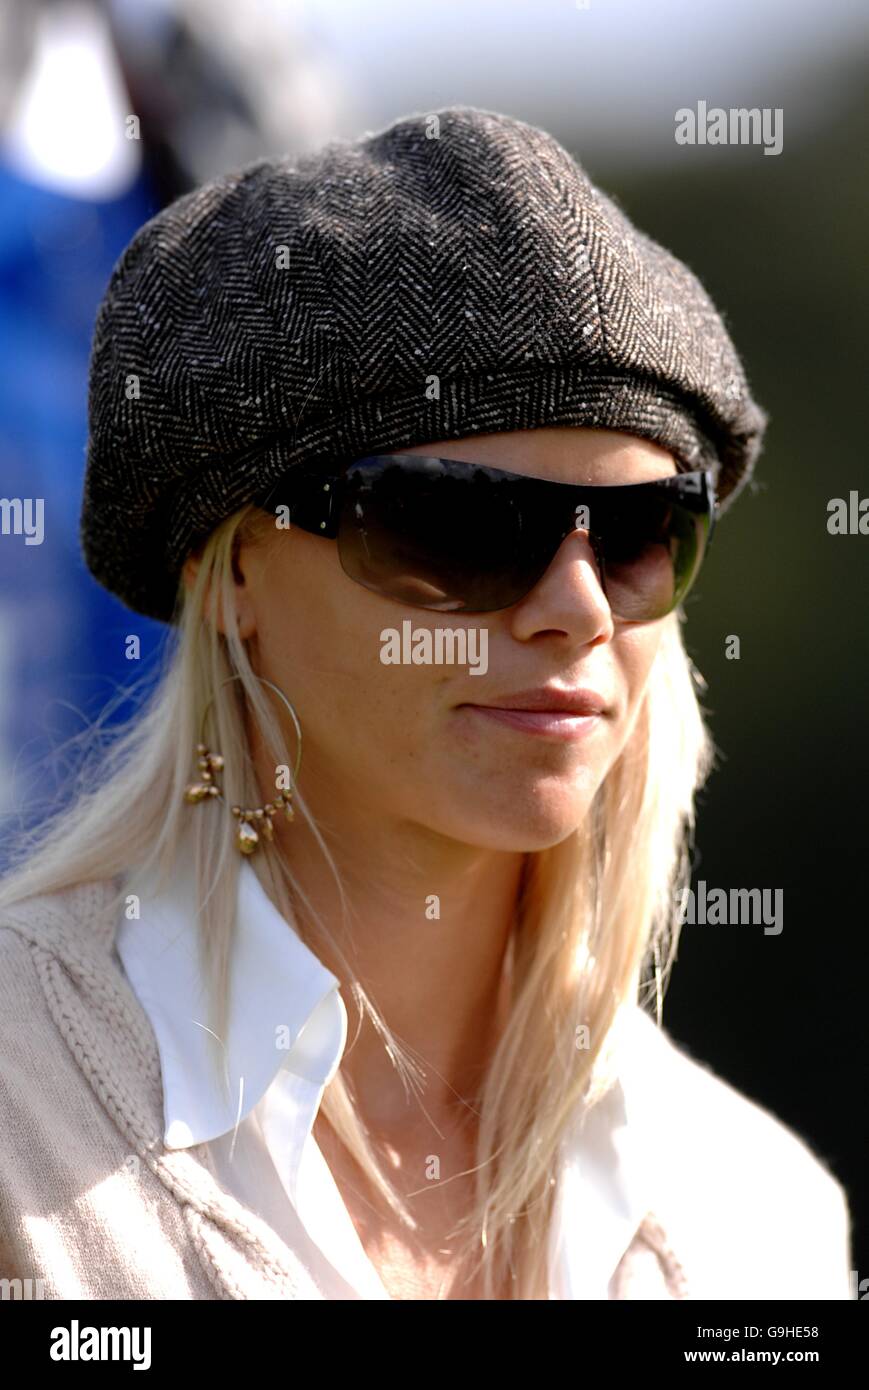 Golf - 36th Ryder Cup - Day One - The K Club. Tiger Woods wife Elin Stock Photo